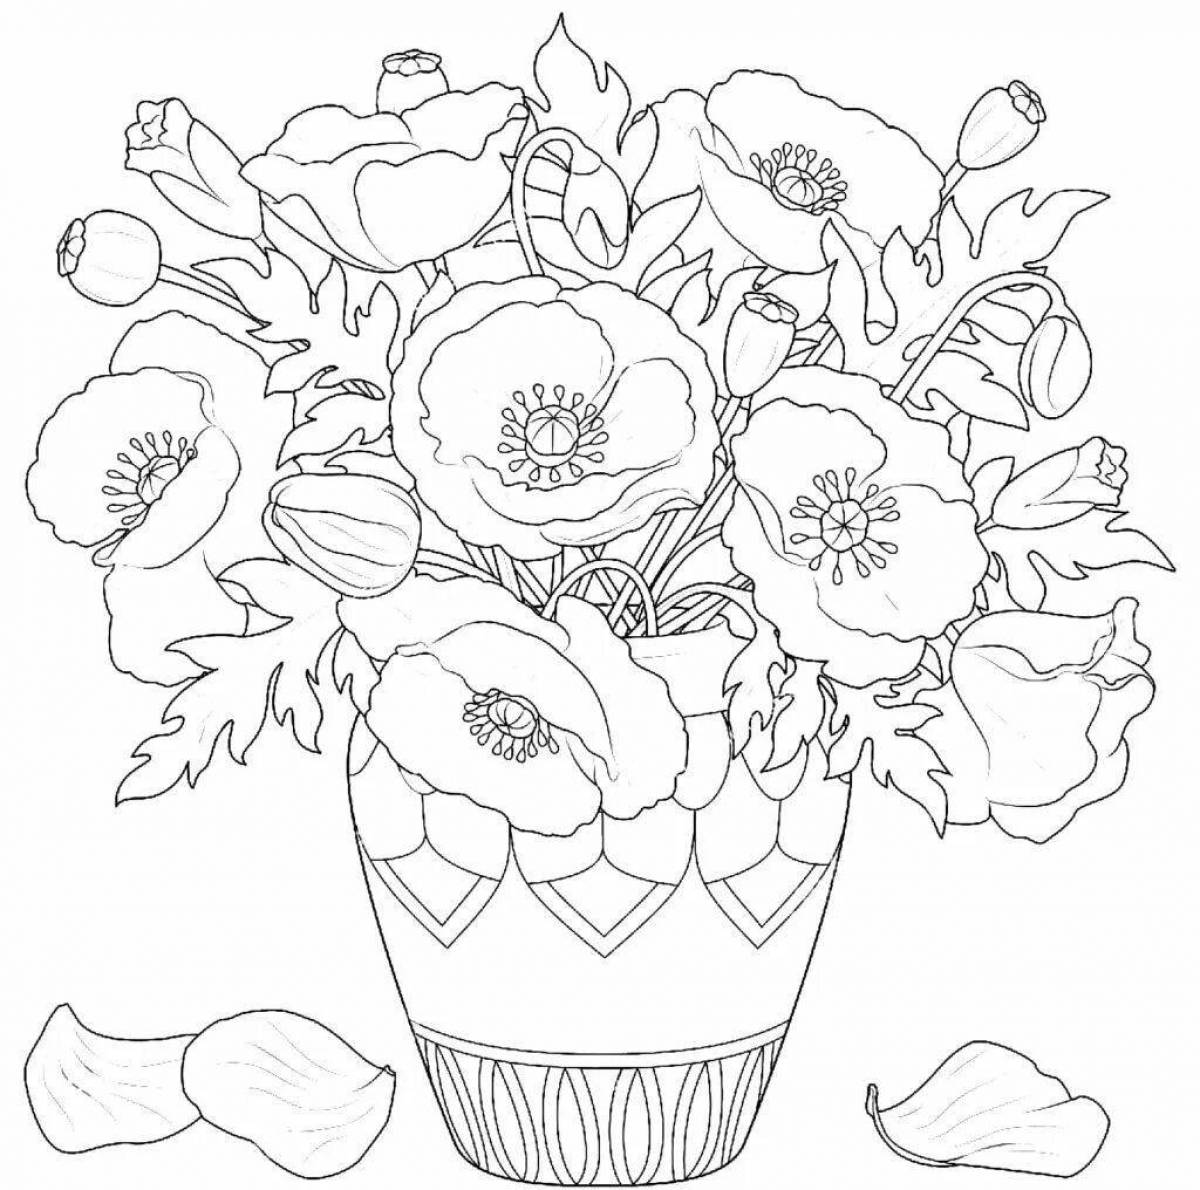 Colouring serene large flowers in a vase